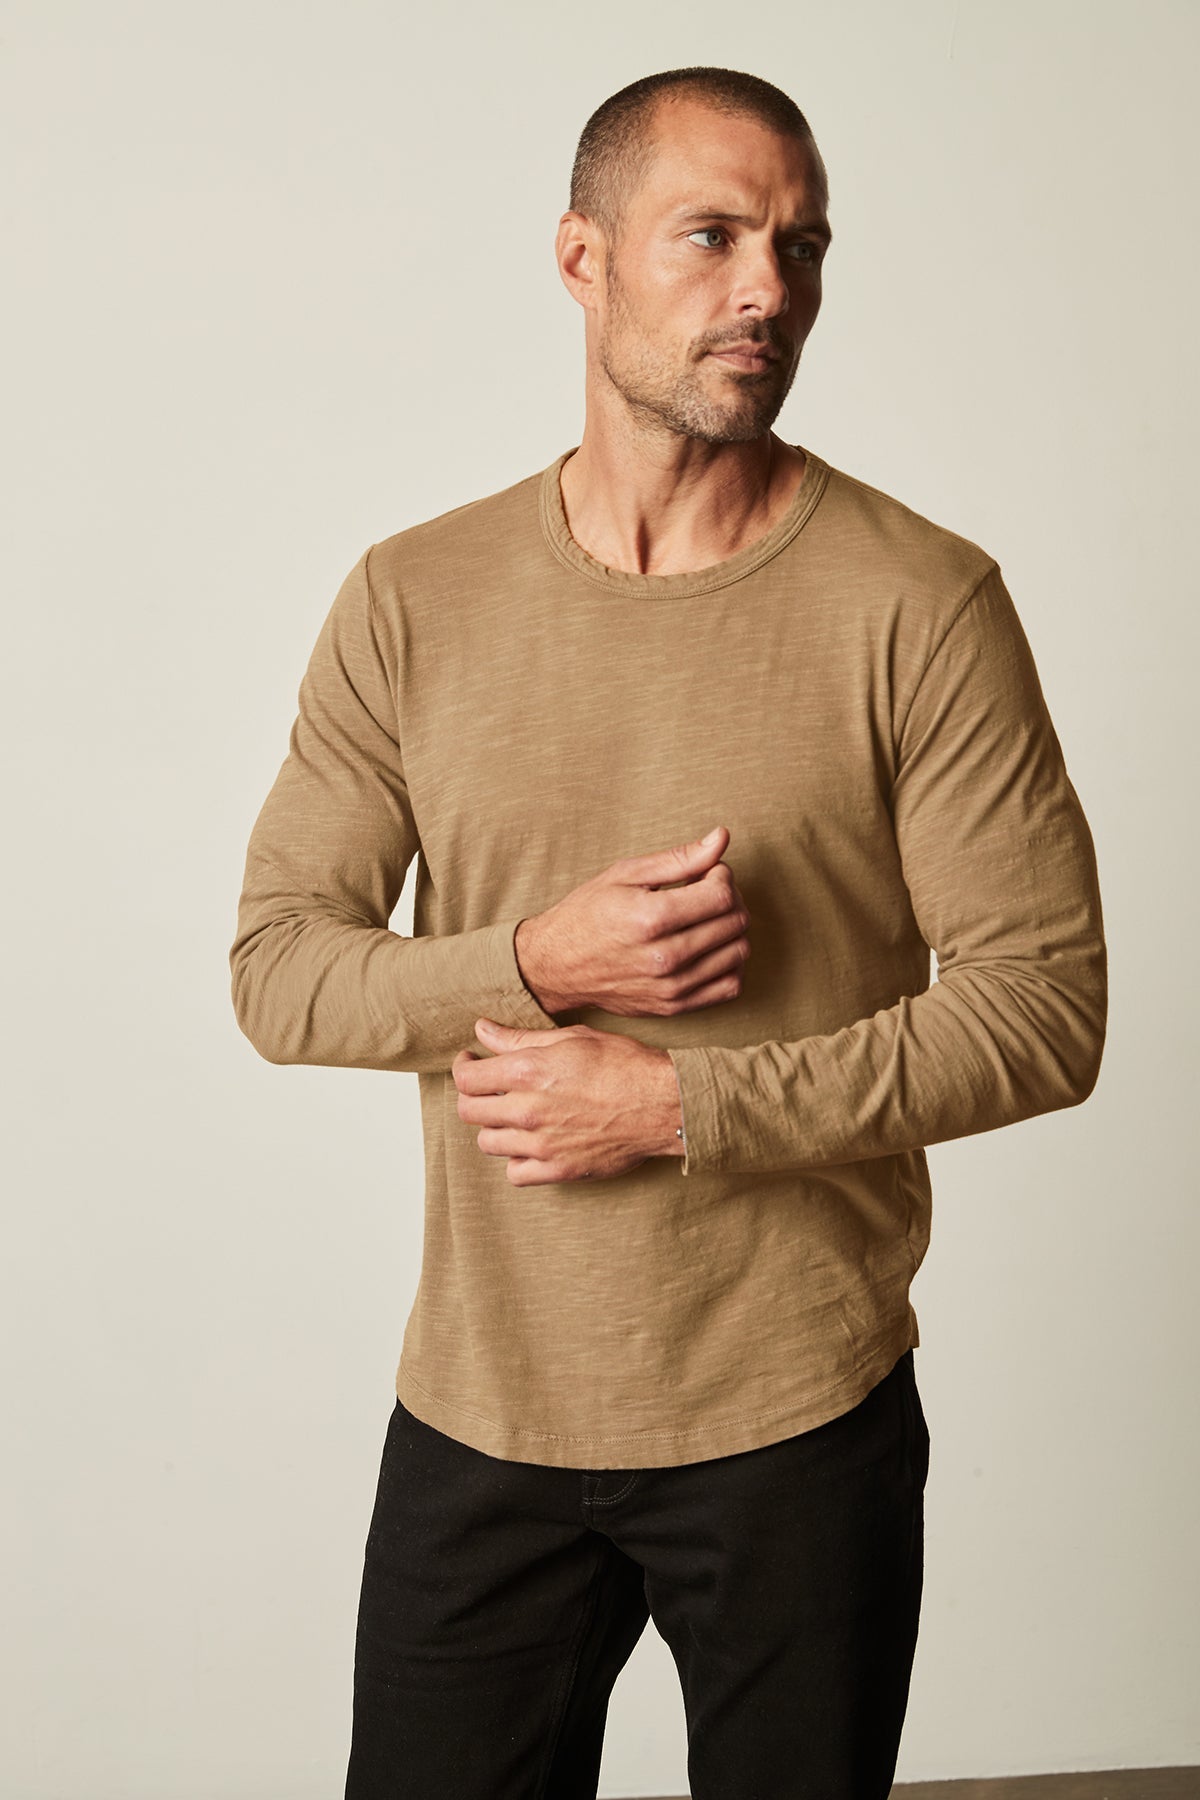 Kai Crew Neck Long Sleeve Tee in camel color with black denim front-26630571360449